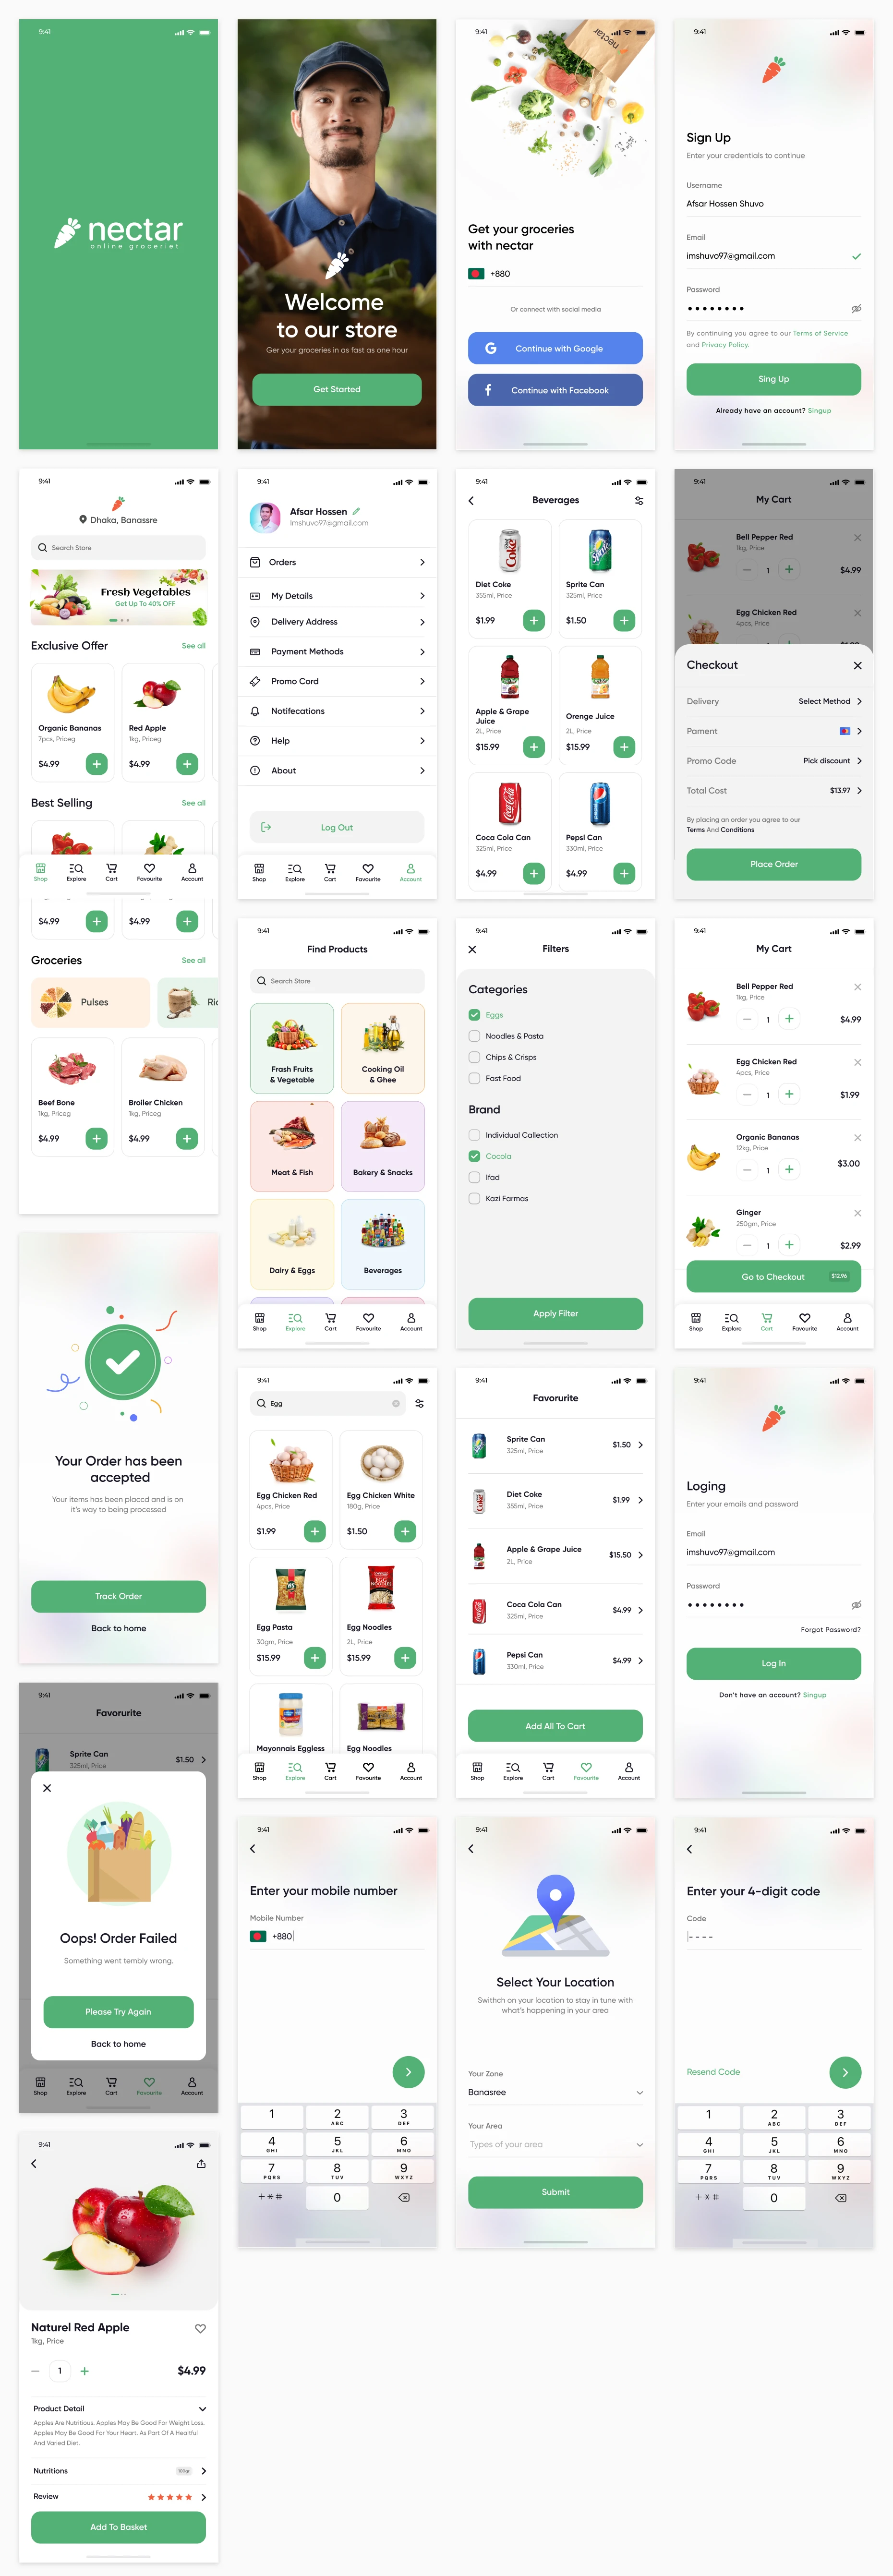 Online Groceries Free App UI Kit for Figma - Minimal and clean groceries app design, 20 screens for you to get started.